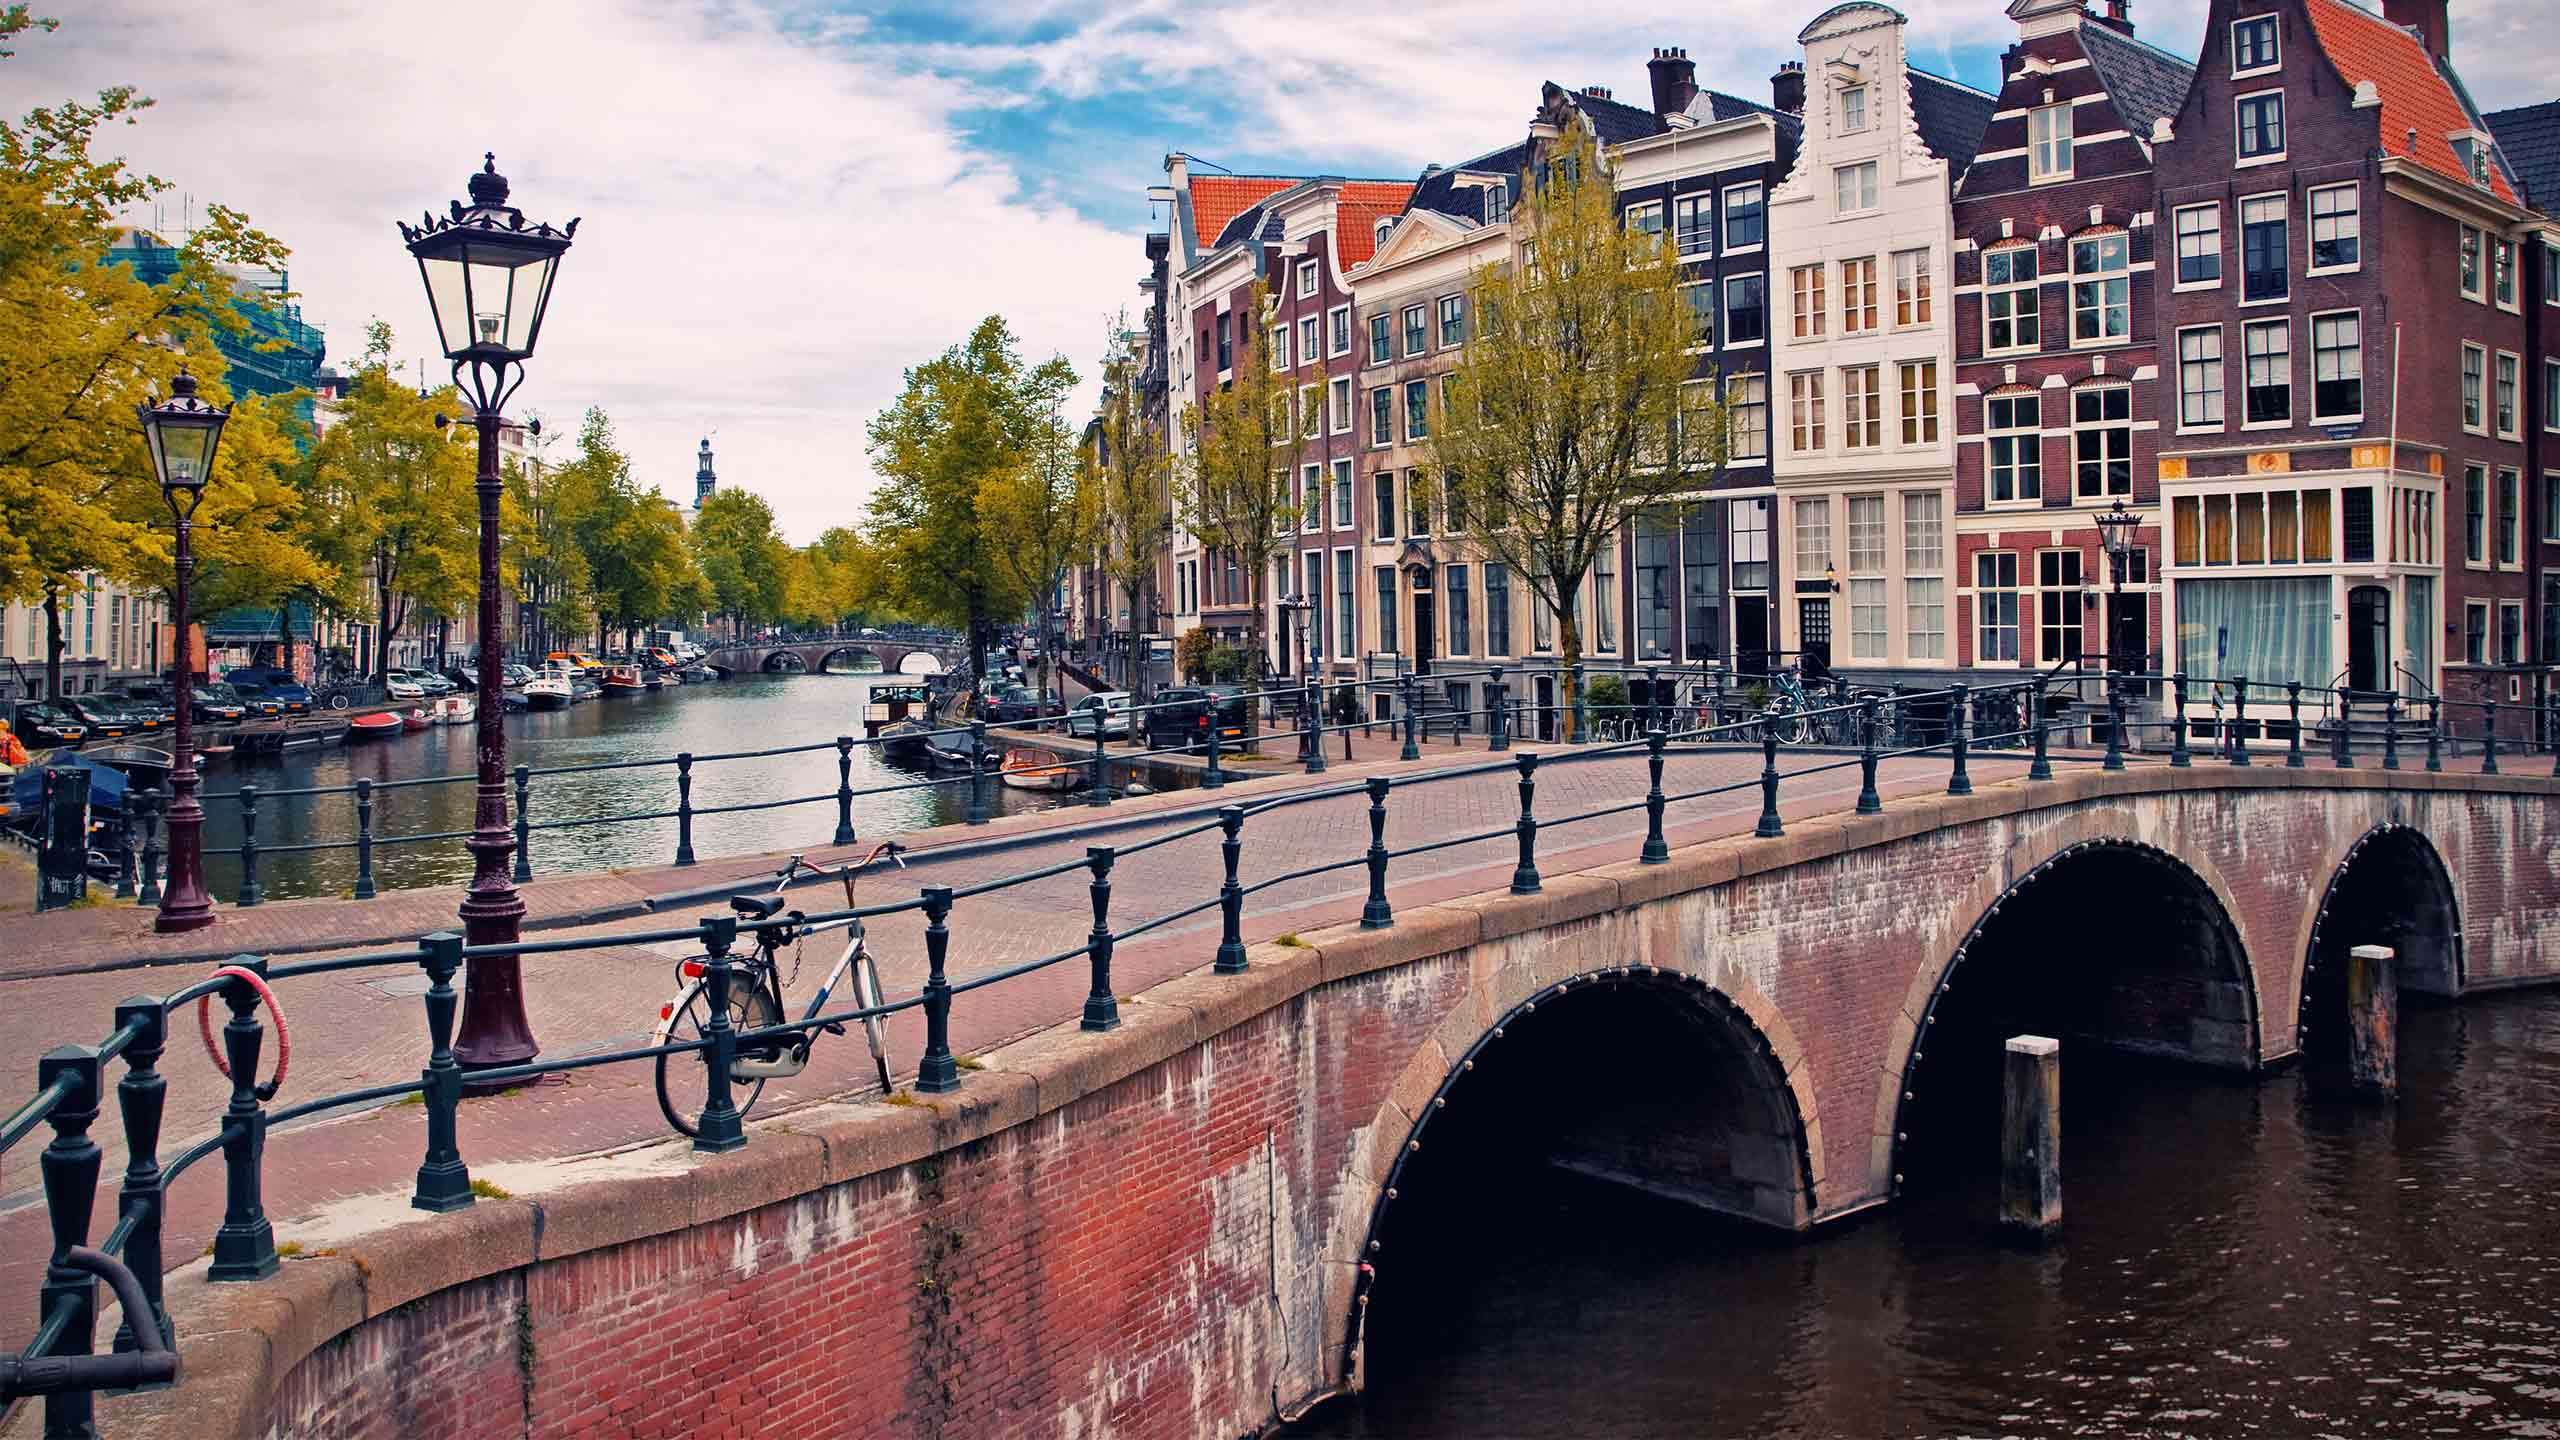 Luxury Netherlands & Belgium Cycle (Windmills & Canals from Amsterdam to Bruges) 6D5N, Fully Guided